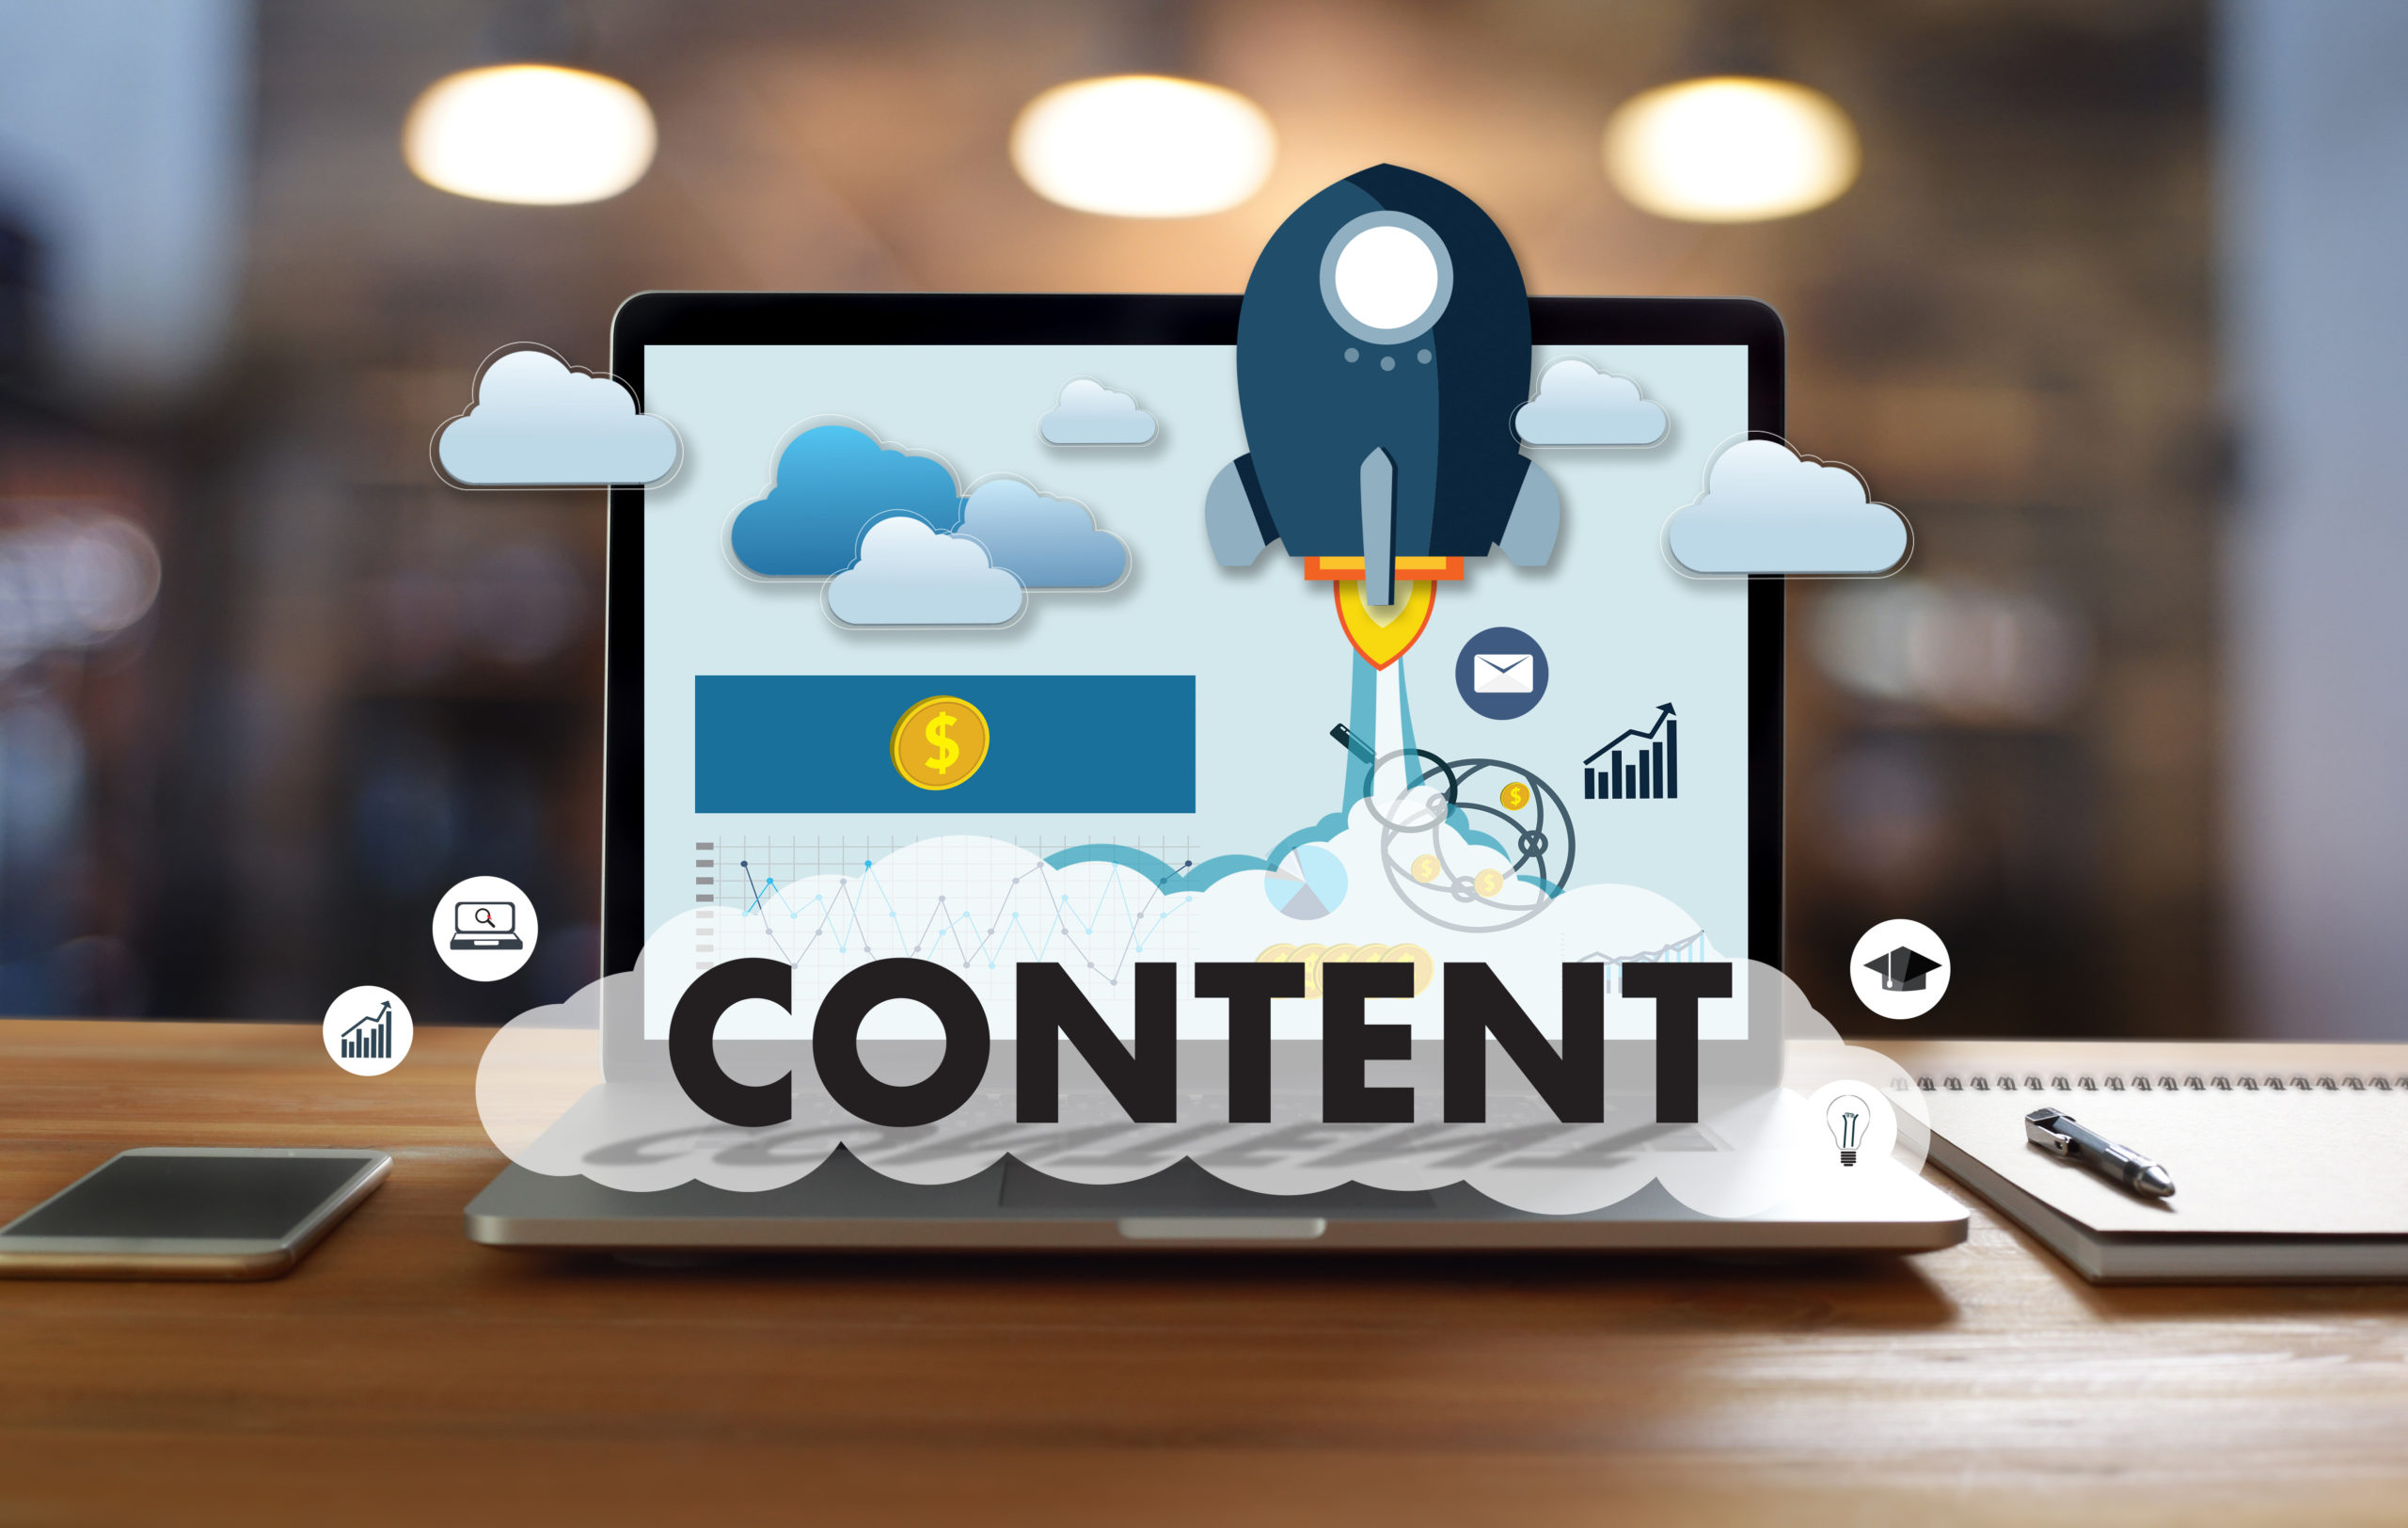 content marketing for business's is the best way to market yourself and display your companies true message